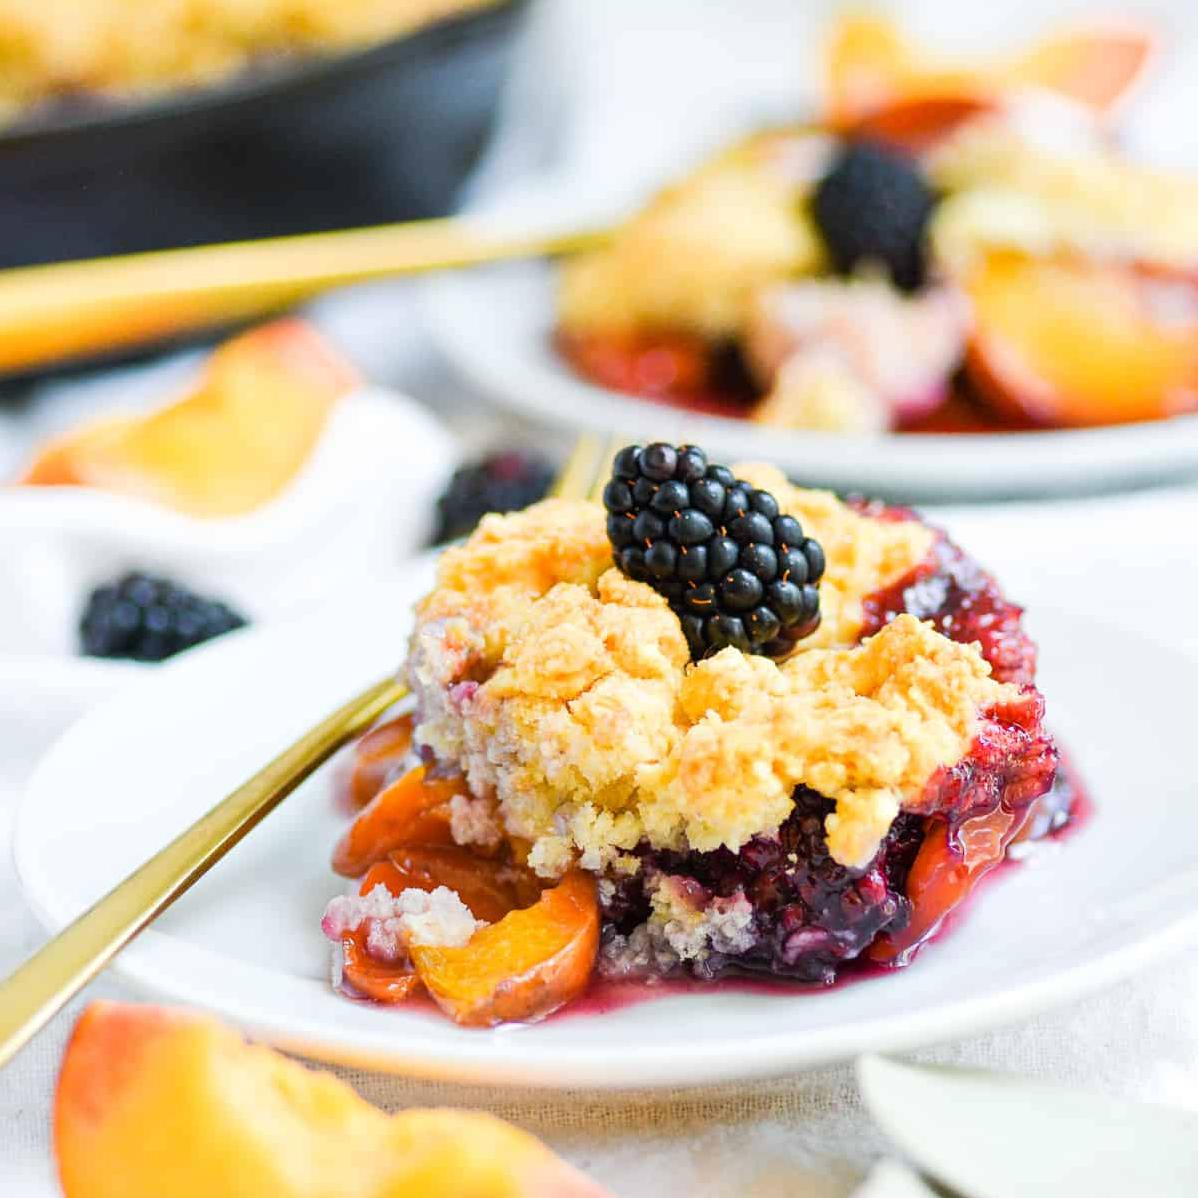  It's hard to resist digging into this dessert when the aroma of baked peaches and blackberries fills the air.